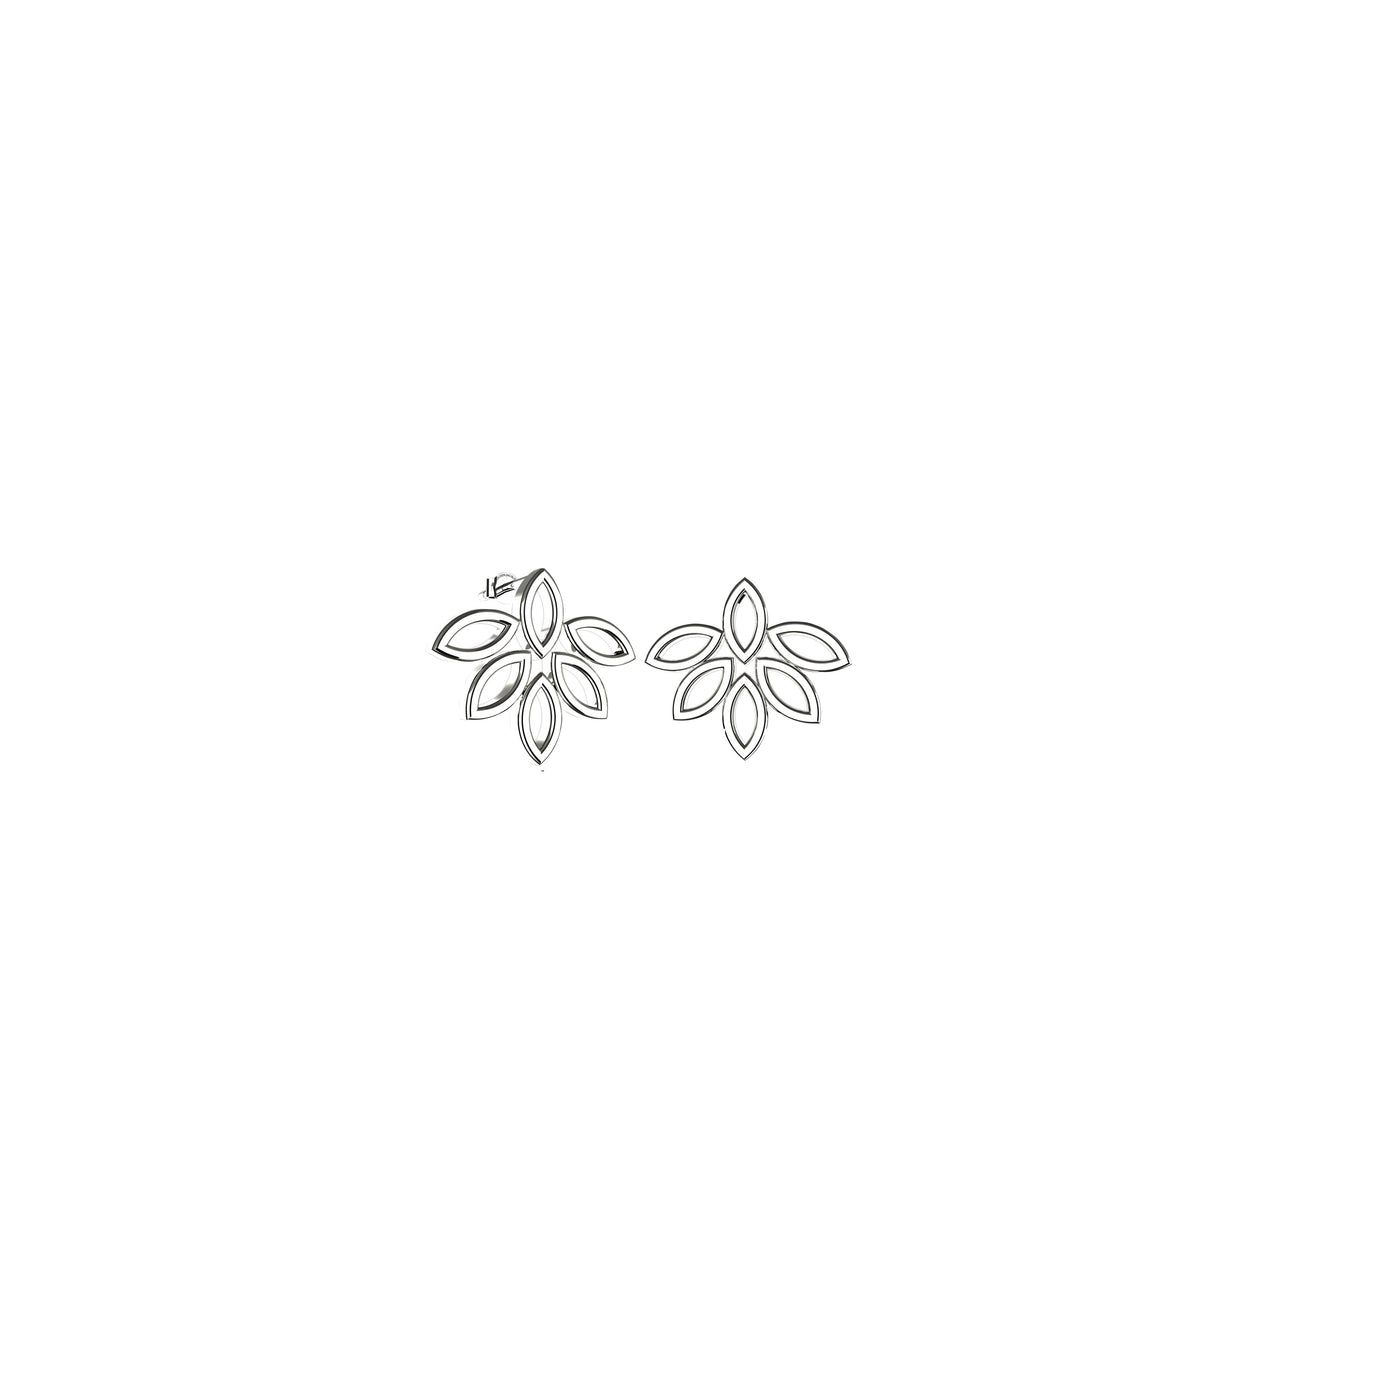 Gold Plated Leaf Earring Studs